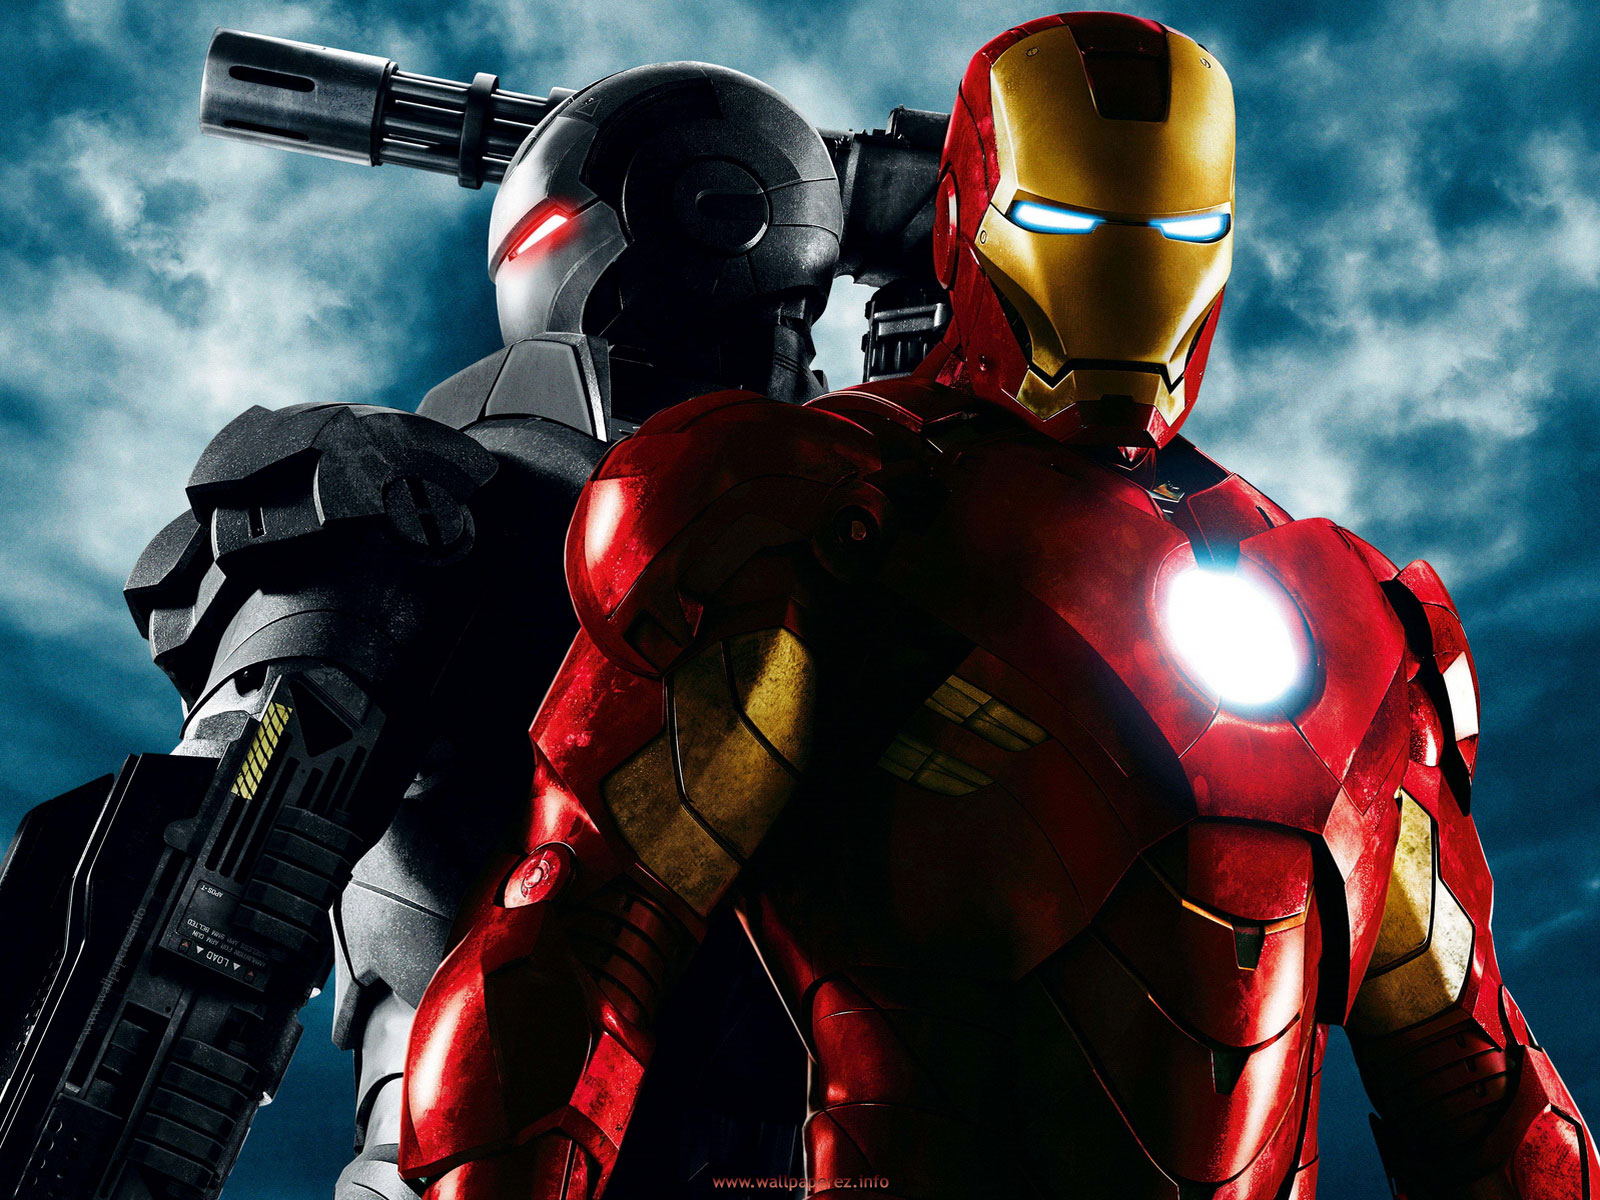 Iron Man 2 Movie Wallpapers HQ Images Download